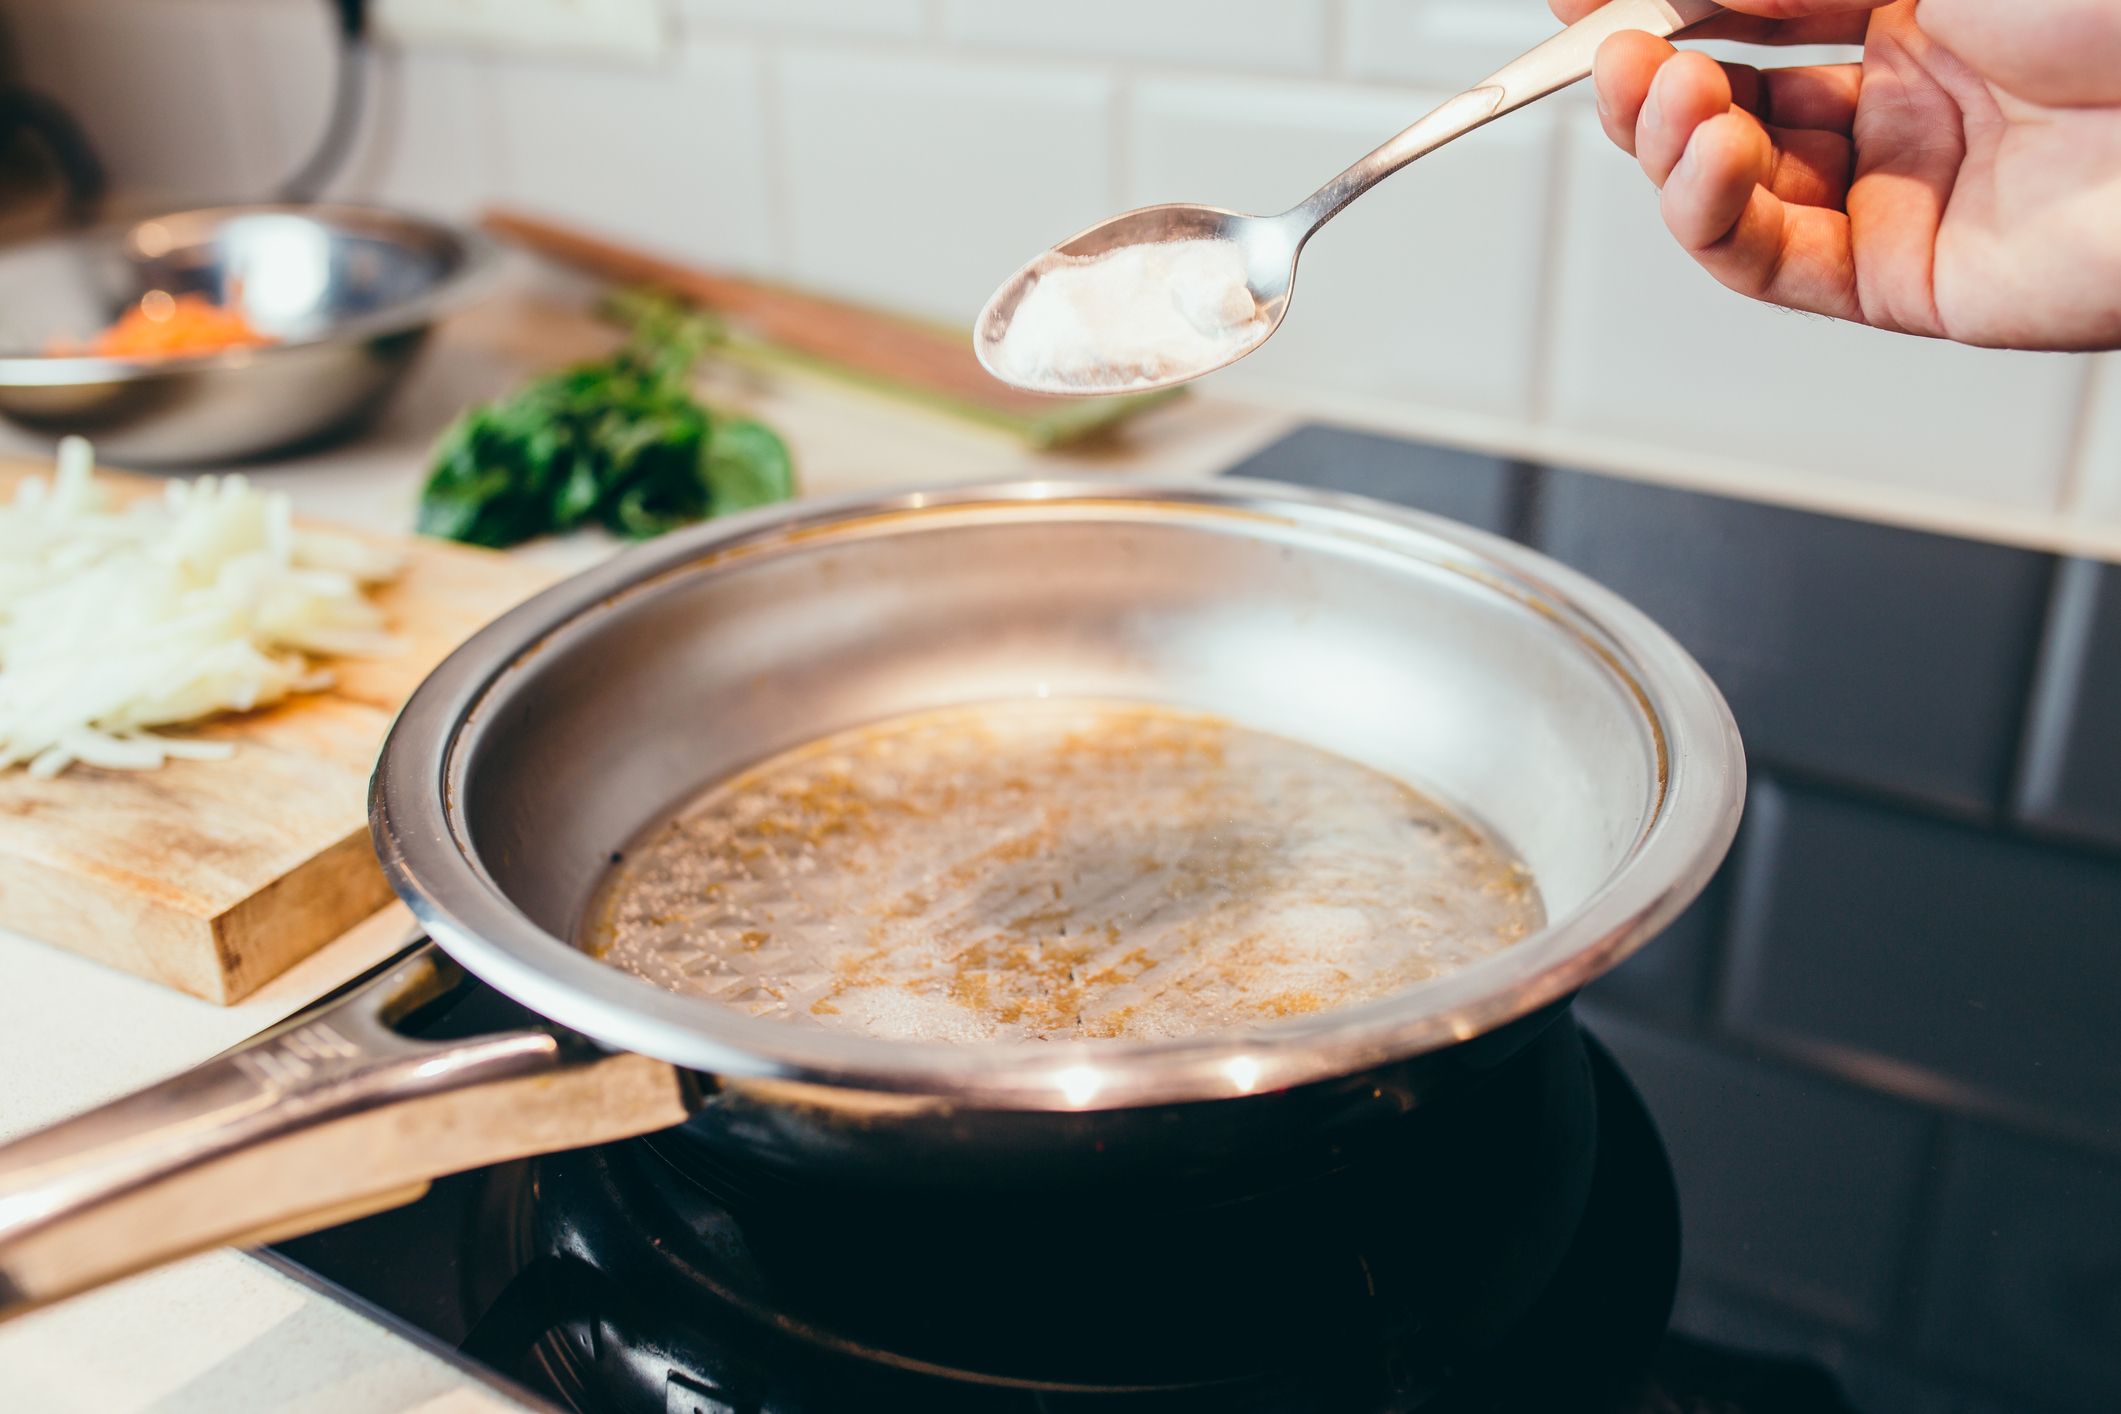 How to Clean Frying Pan